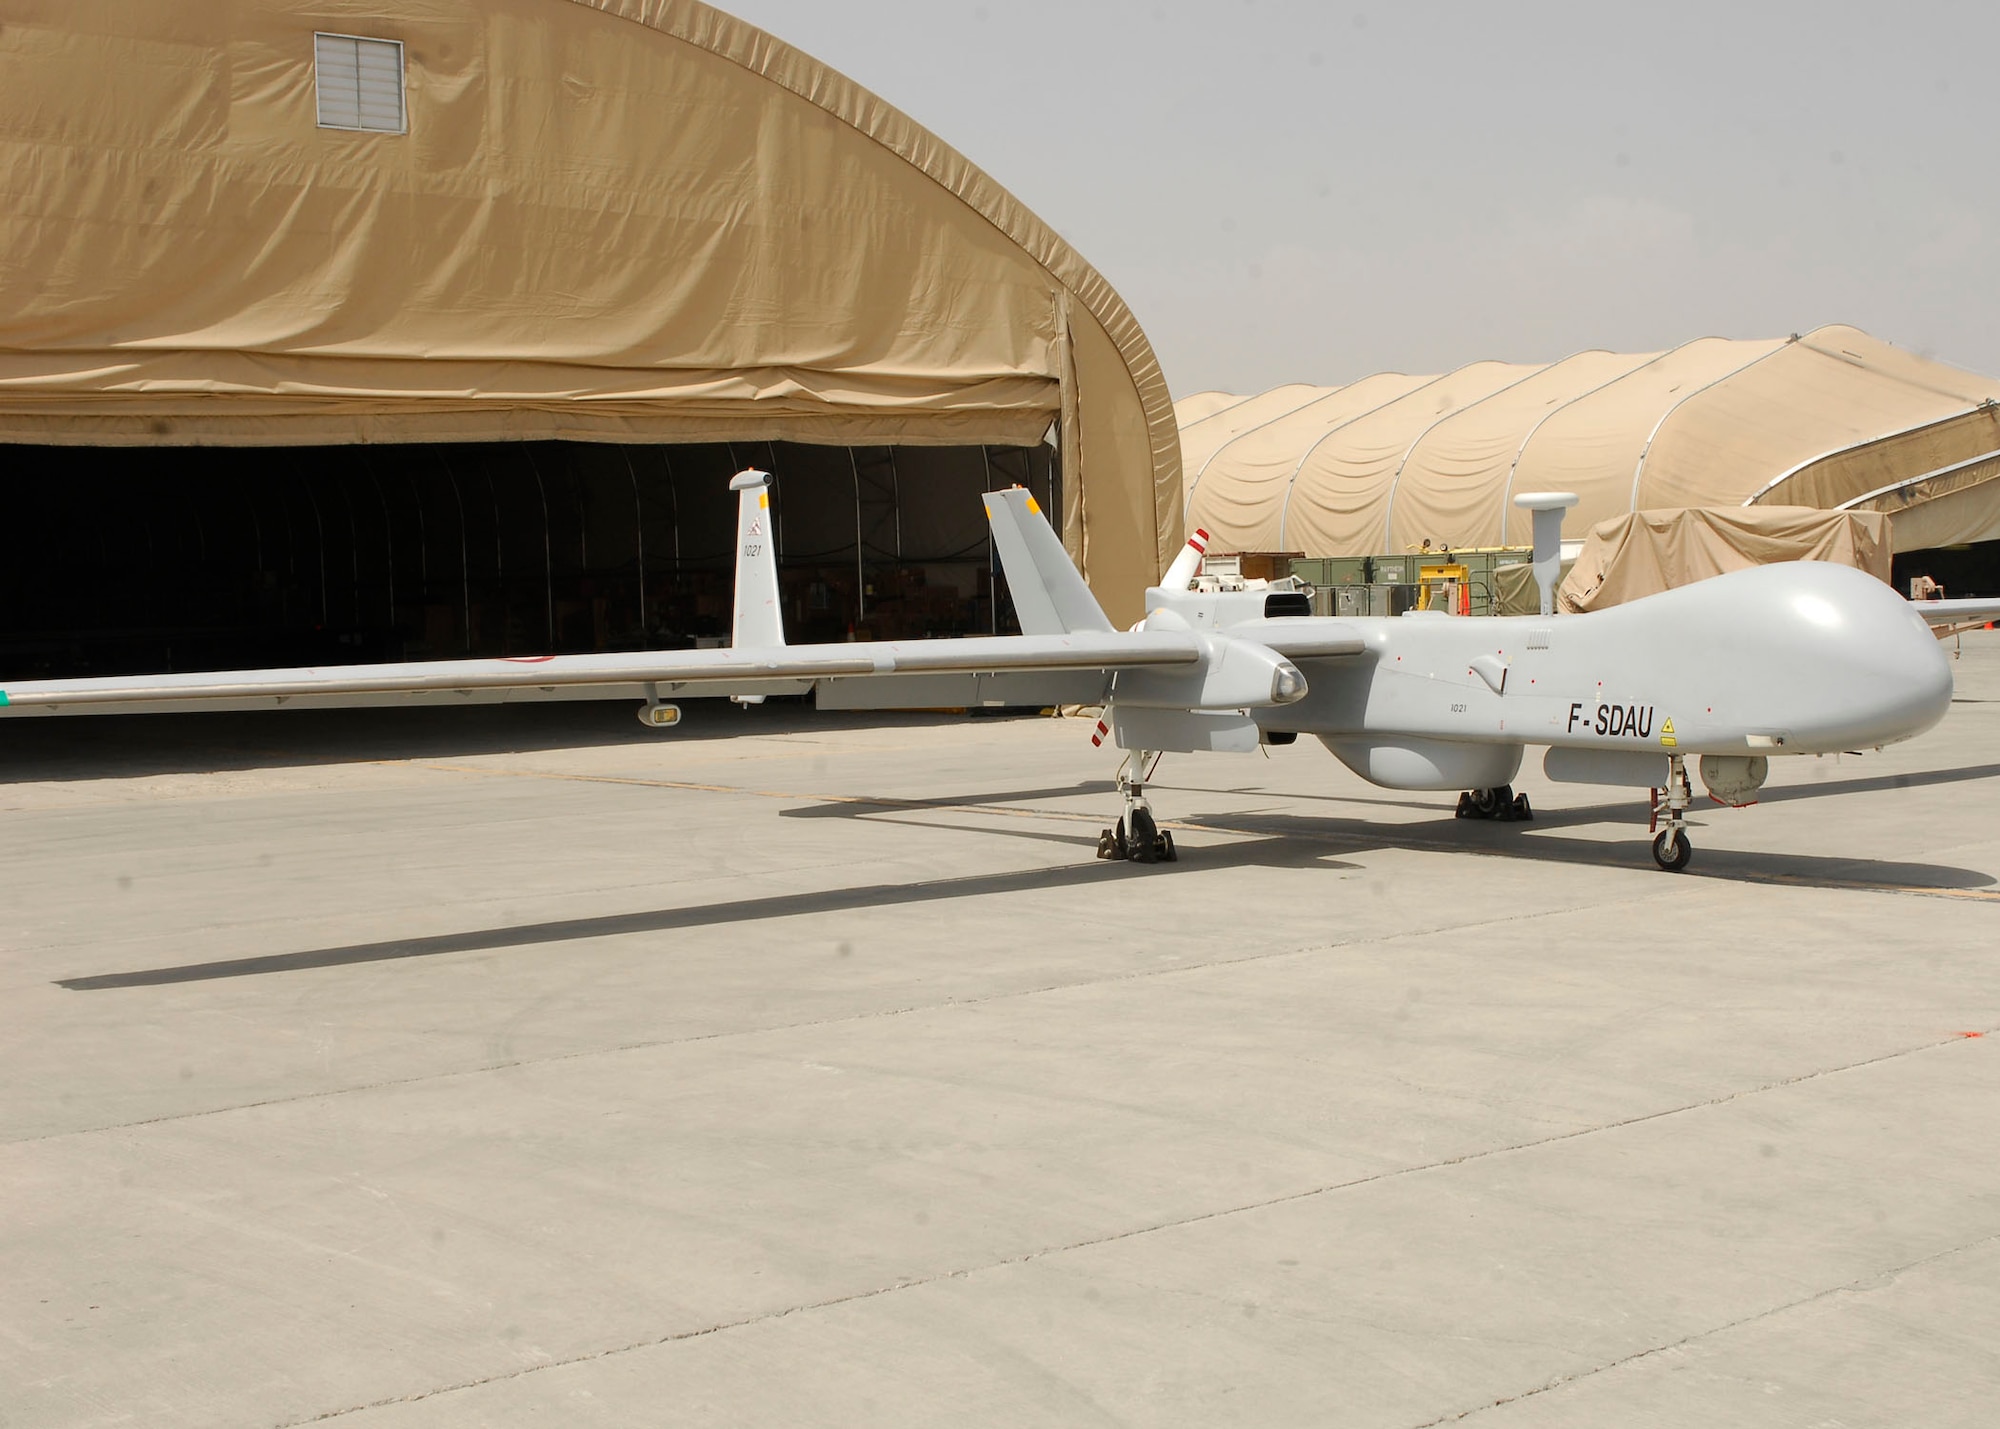 BAGRAM AIR FIELD, Afghanistan - An Unmanned Aerial Vehicle, from the French UAV Squadron, waits to be flown, here July 11. The French UAV is very similar to the U.S. Predator MQ-1 UAV. (U.S. Air Force photo/Senior Airman Felicia Juenke)